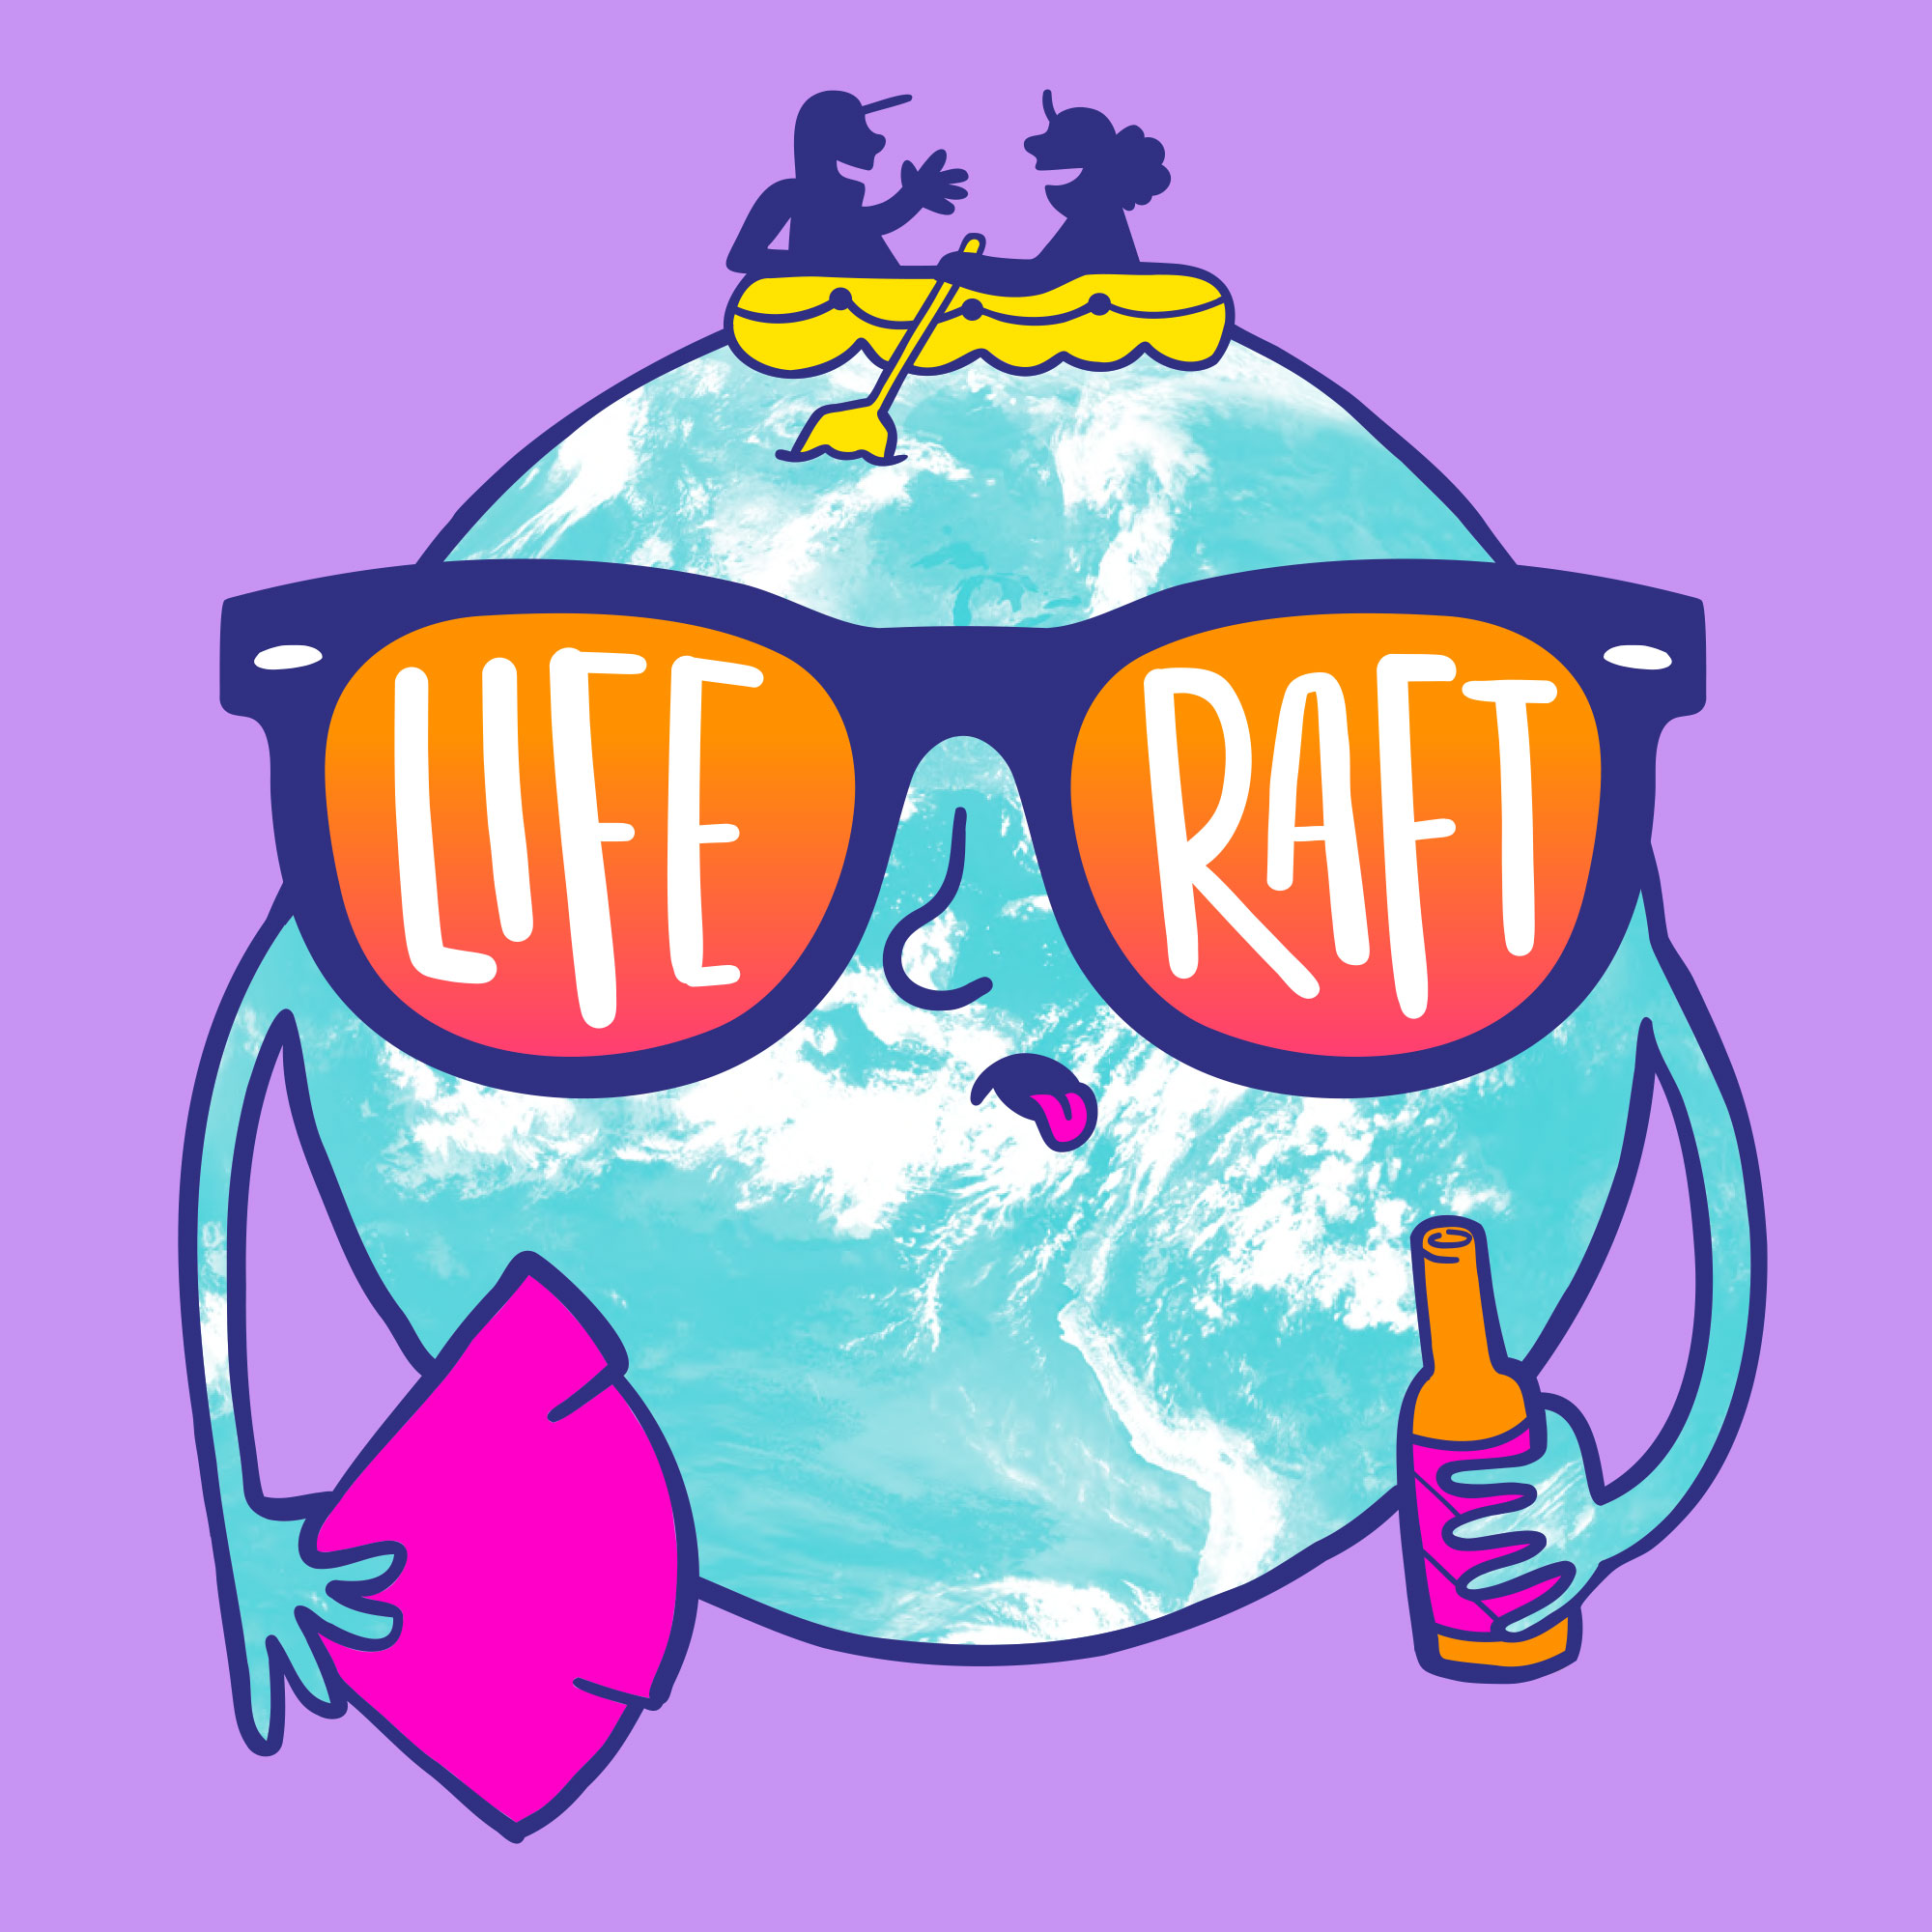 Trailer: Welcome To Life Raft